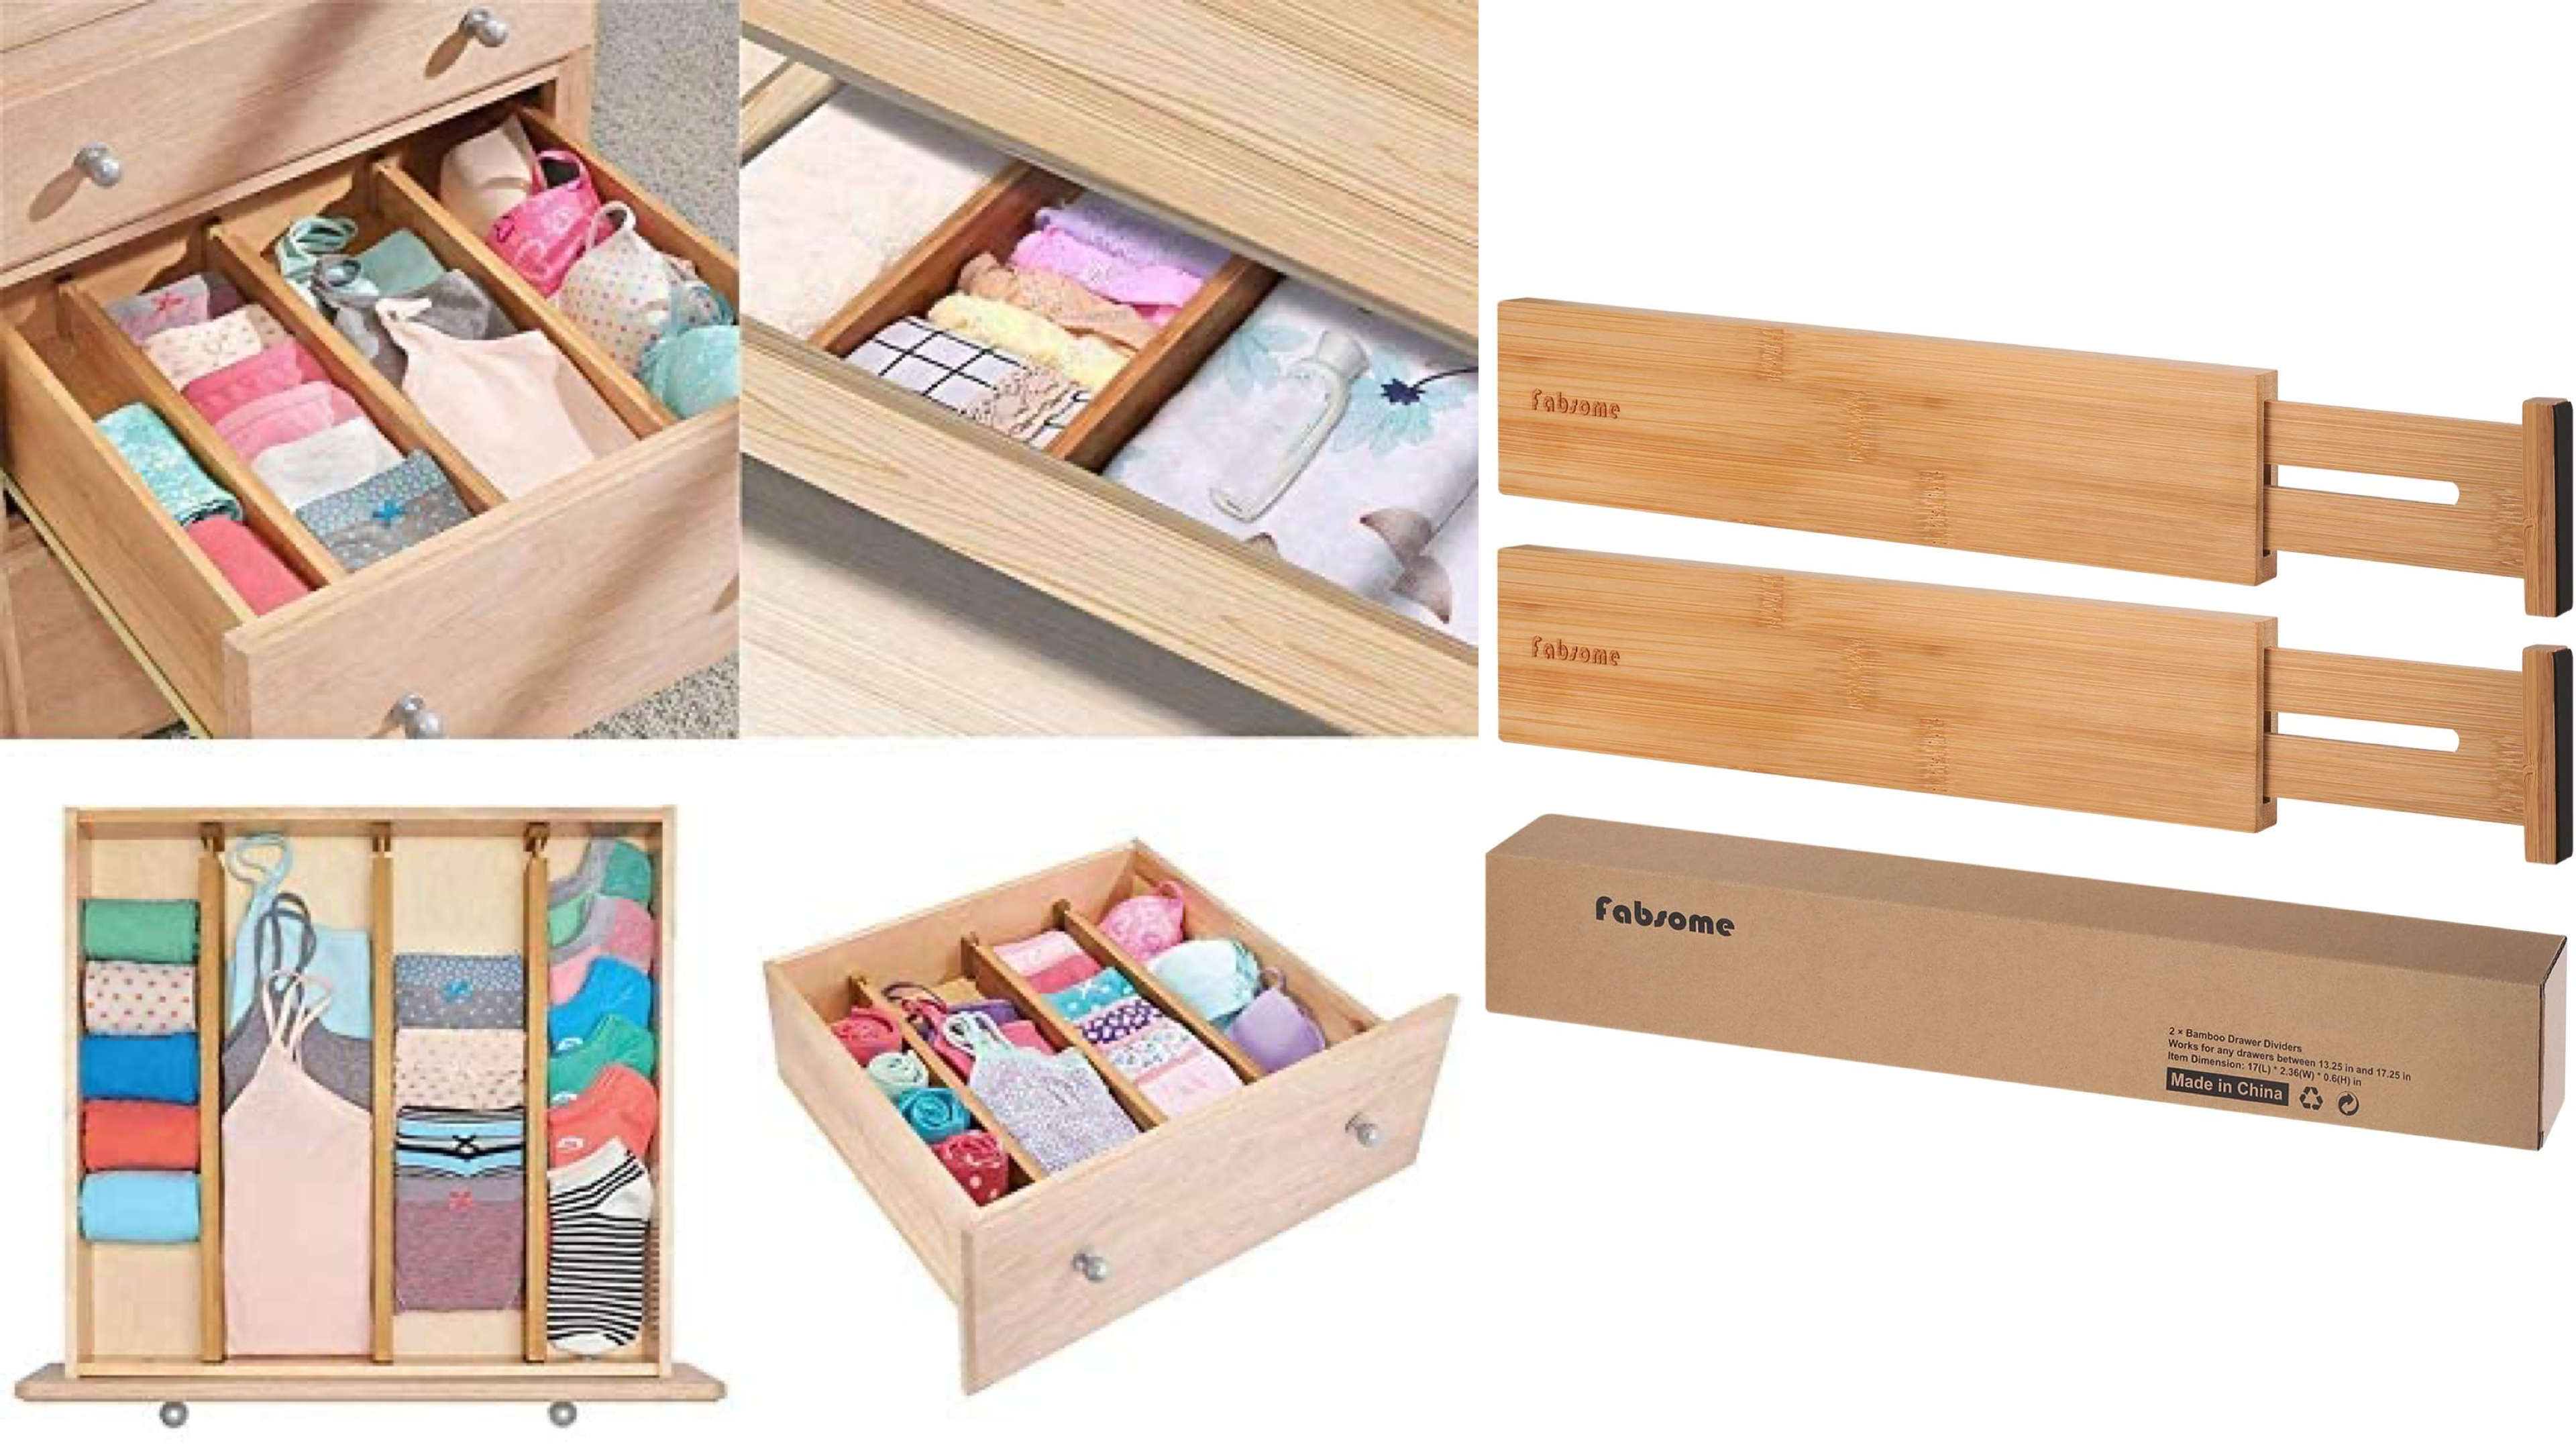 expandable drawer dividers to allow for division and neat piles within drawers 